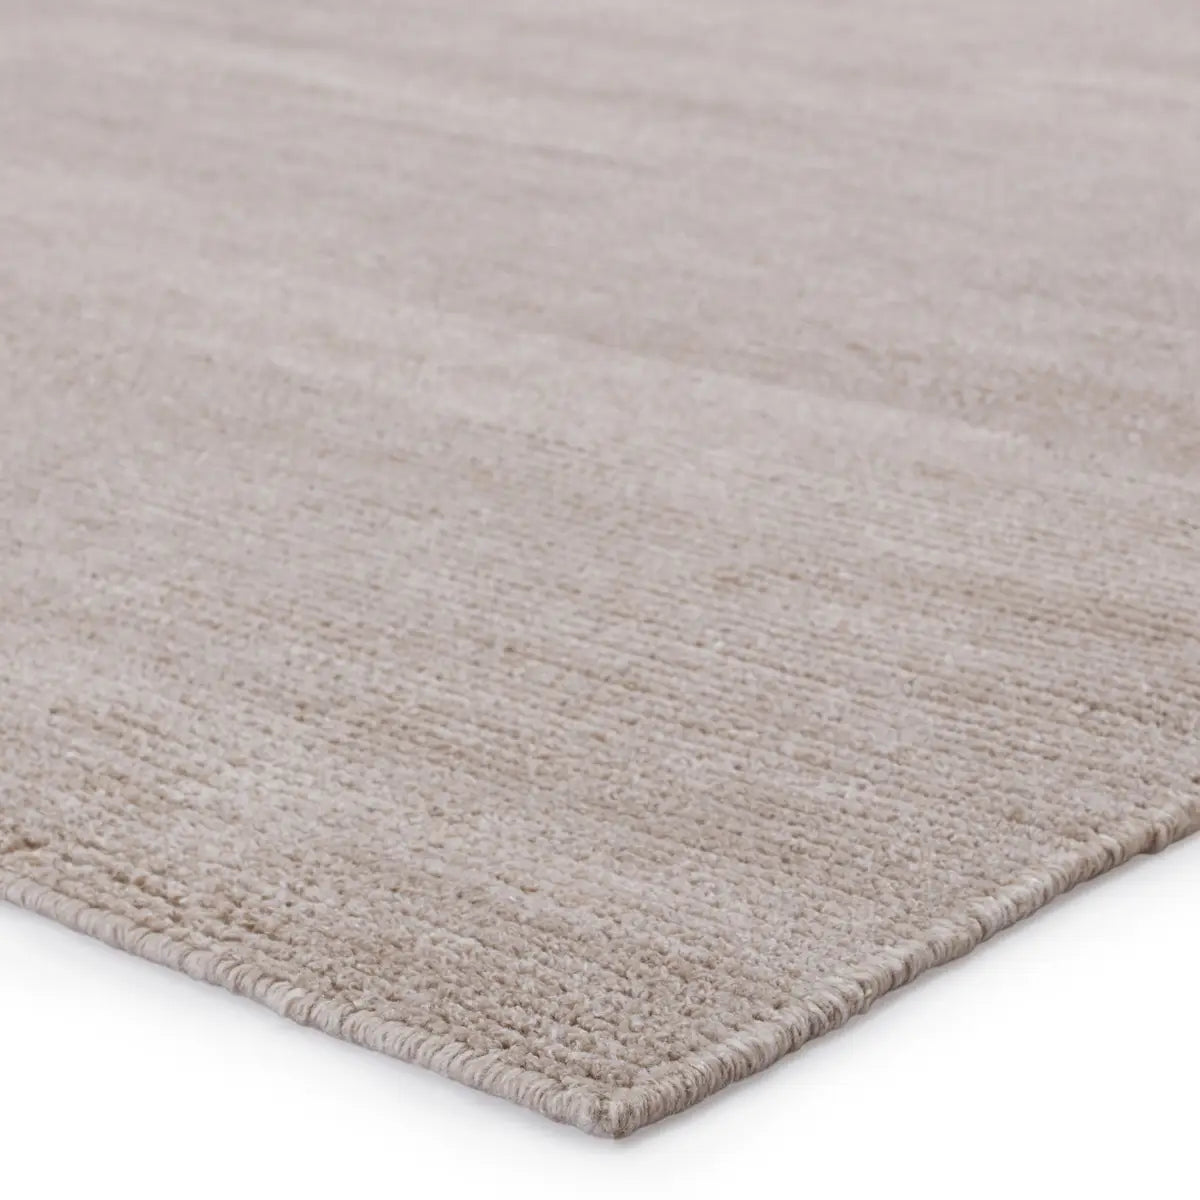 The eco-friendly Rebecca Feather Gray Area Rug by Jaipur Living delivers a fresh accent to patios, kitchens, and dining rooms with its ultra-durable PET yarn handwoven construction. The light taupe colorway grounds any room or area with a fresh, neutral style.